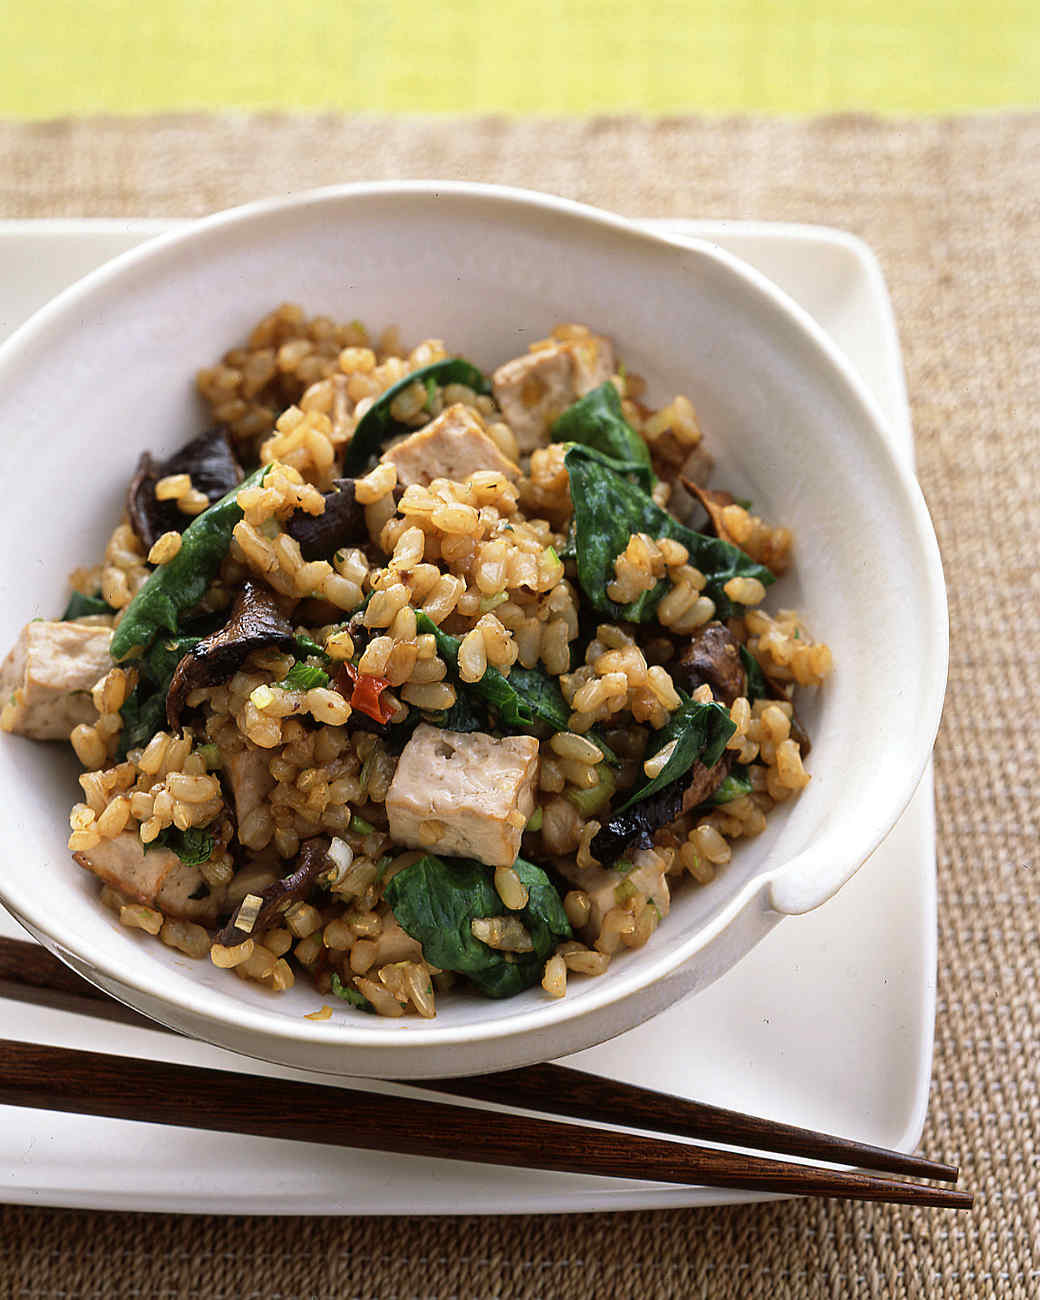 Vegetarian Recipes With Spinach
 Brown Rice with Tofu Dried Mushrooms and Baby Spinach